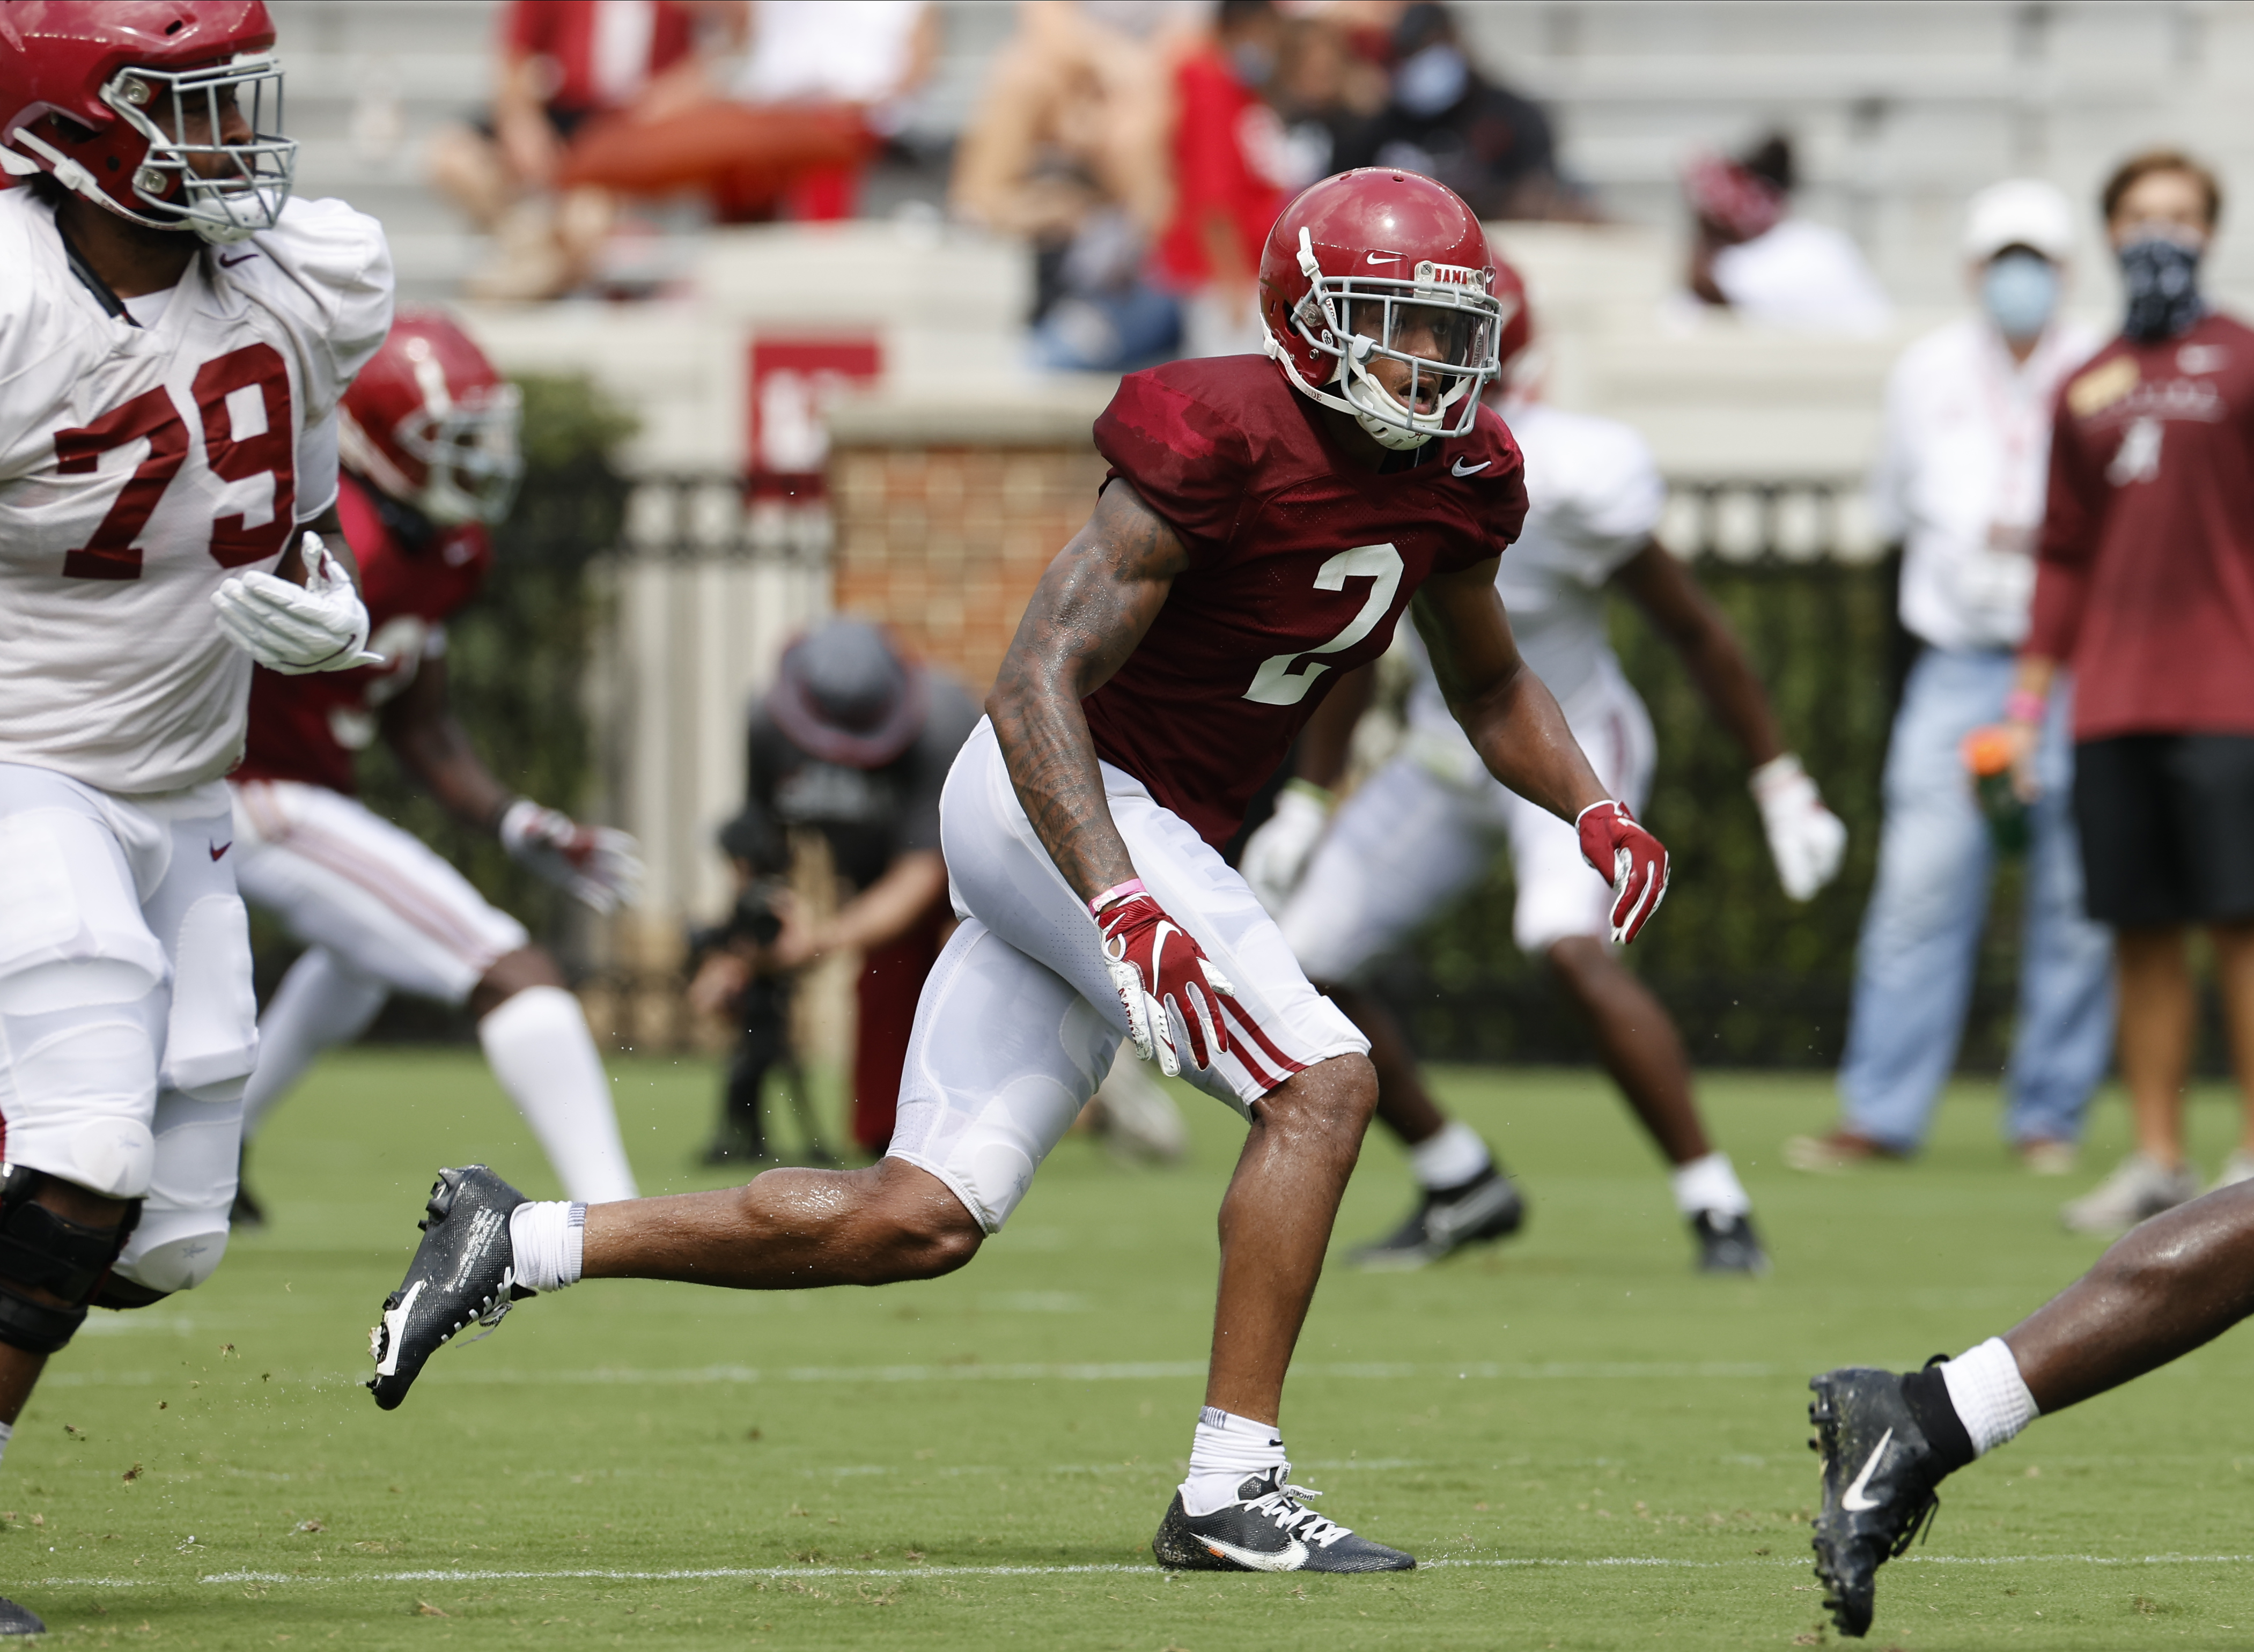 First Scrimmage Gives Alabama Snapshot of Team's Progress